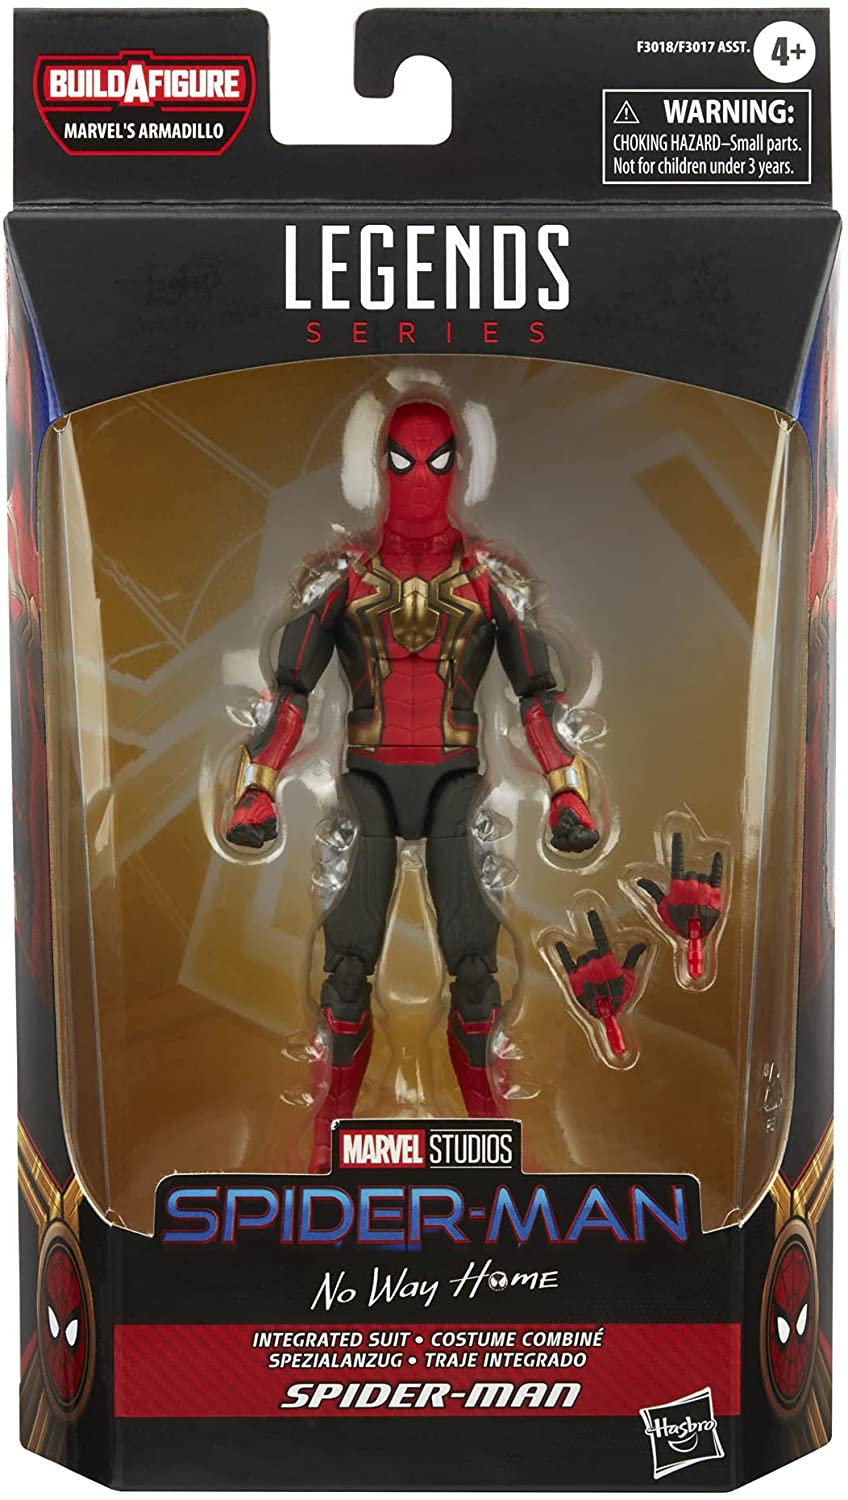 Spider-Man Marvel Legends Series Integrated Suit 6-inch Collectible Action Figure